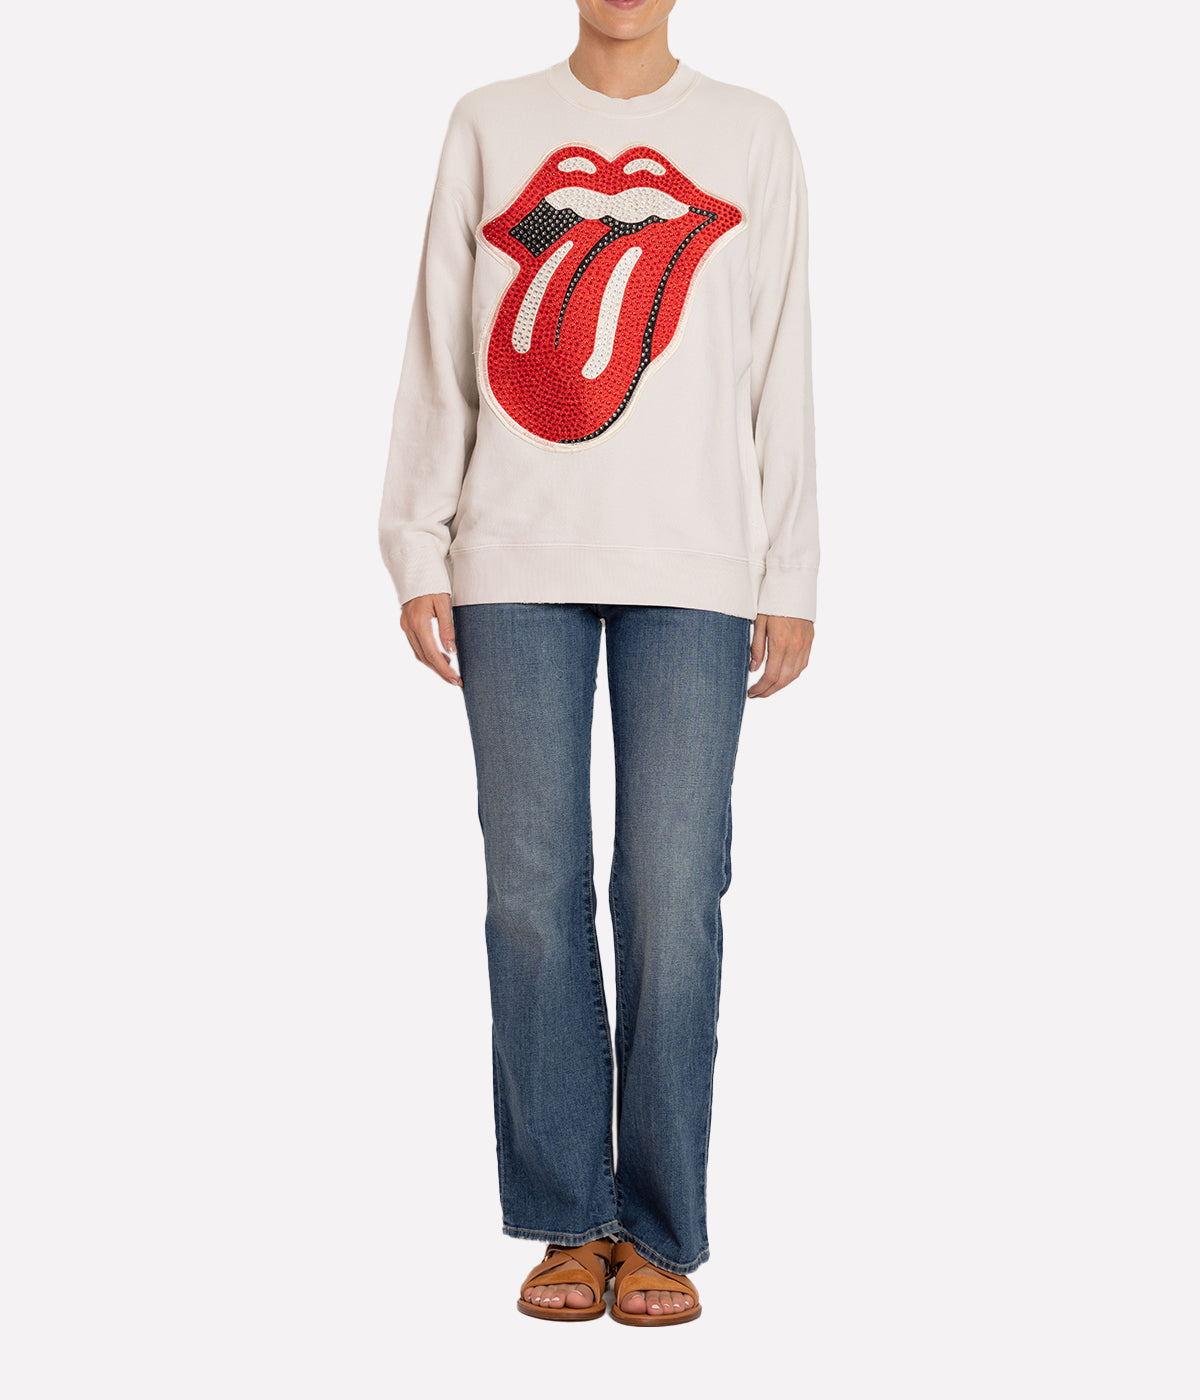 Rolling Stones Crystal Patch Sweatshirt in White Vintage